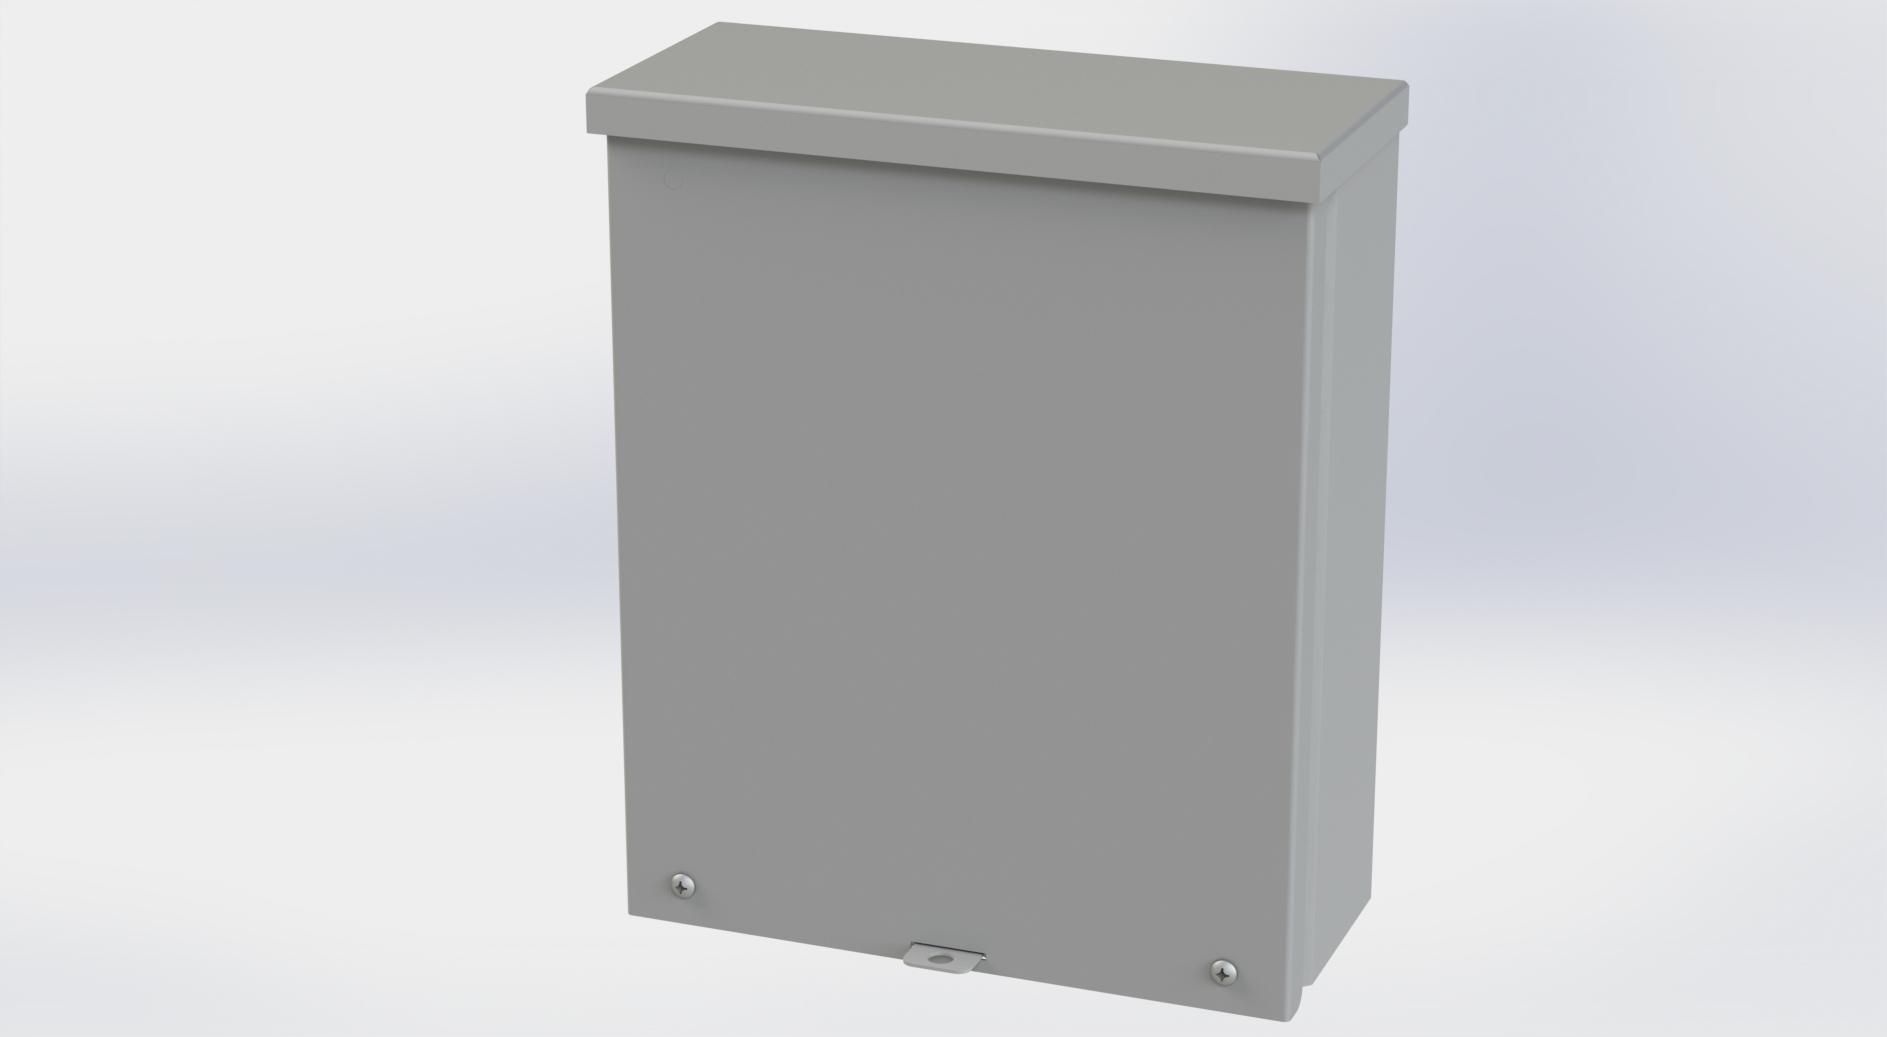 Saginaw Control SCE-12R104 Type-3R Screw Cover Enclosure, Height:12.00", Width:10.00", Depth:4.00", ANSI-61 gray powder coating inside and out.